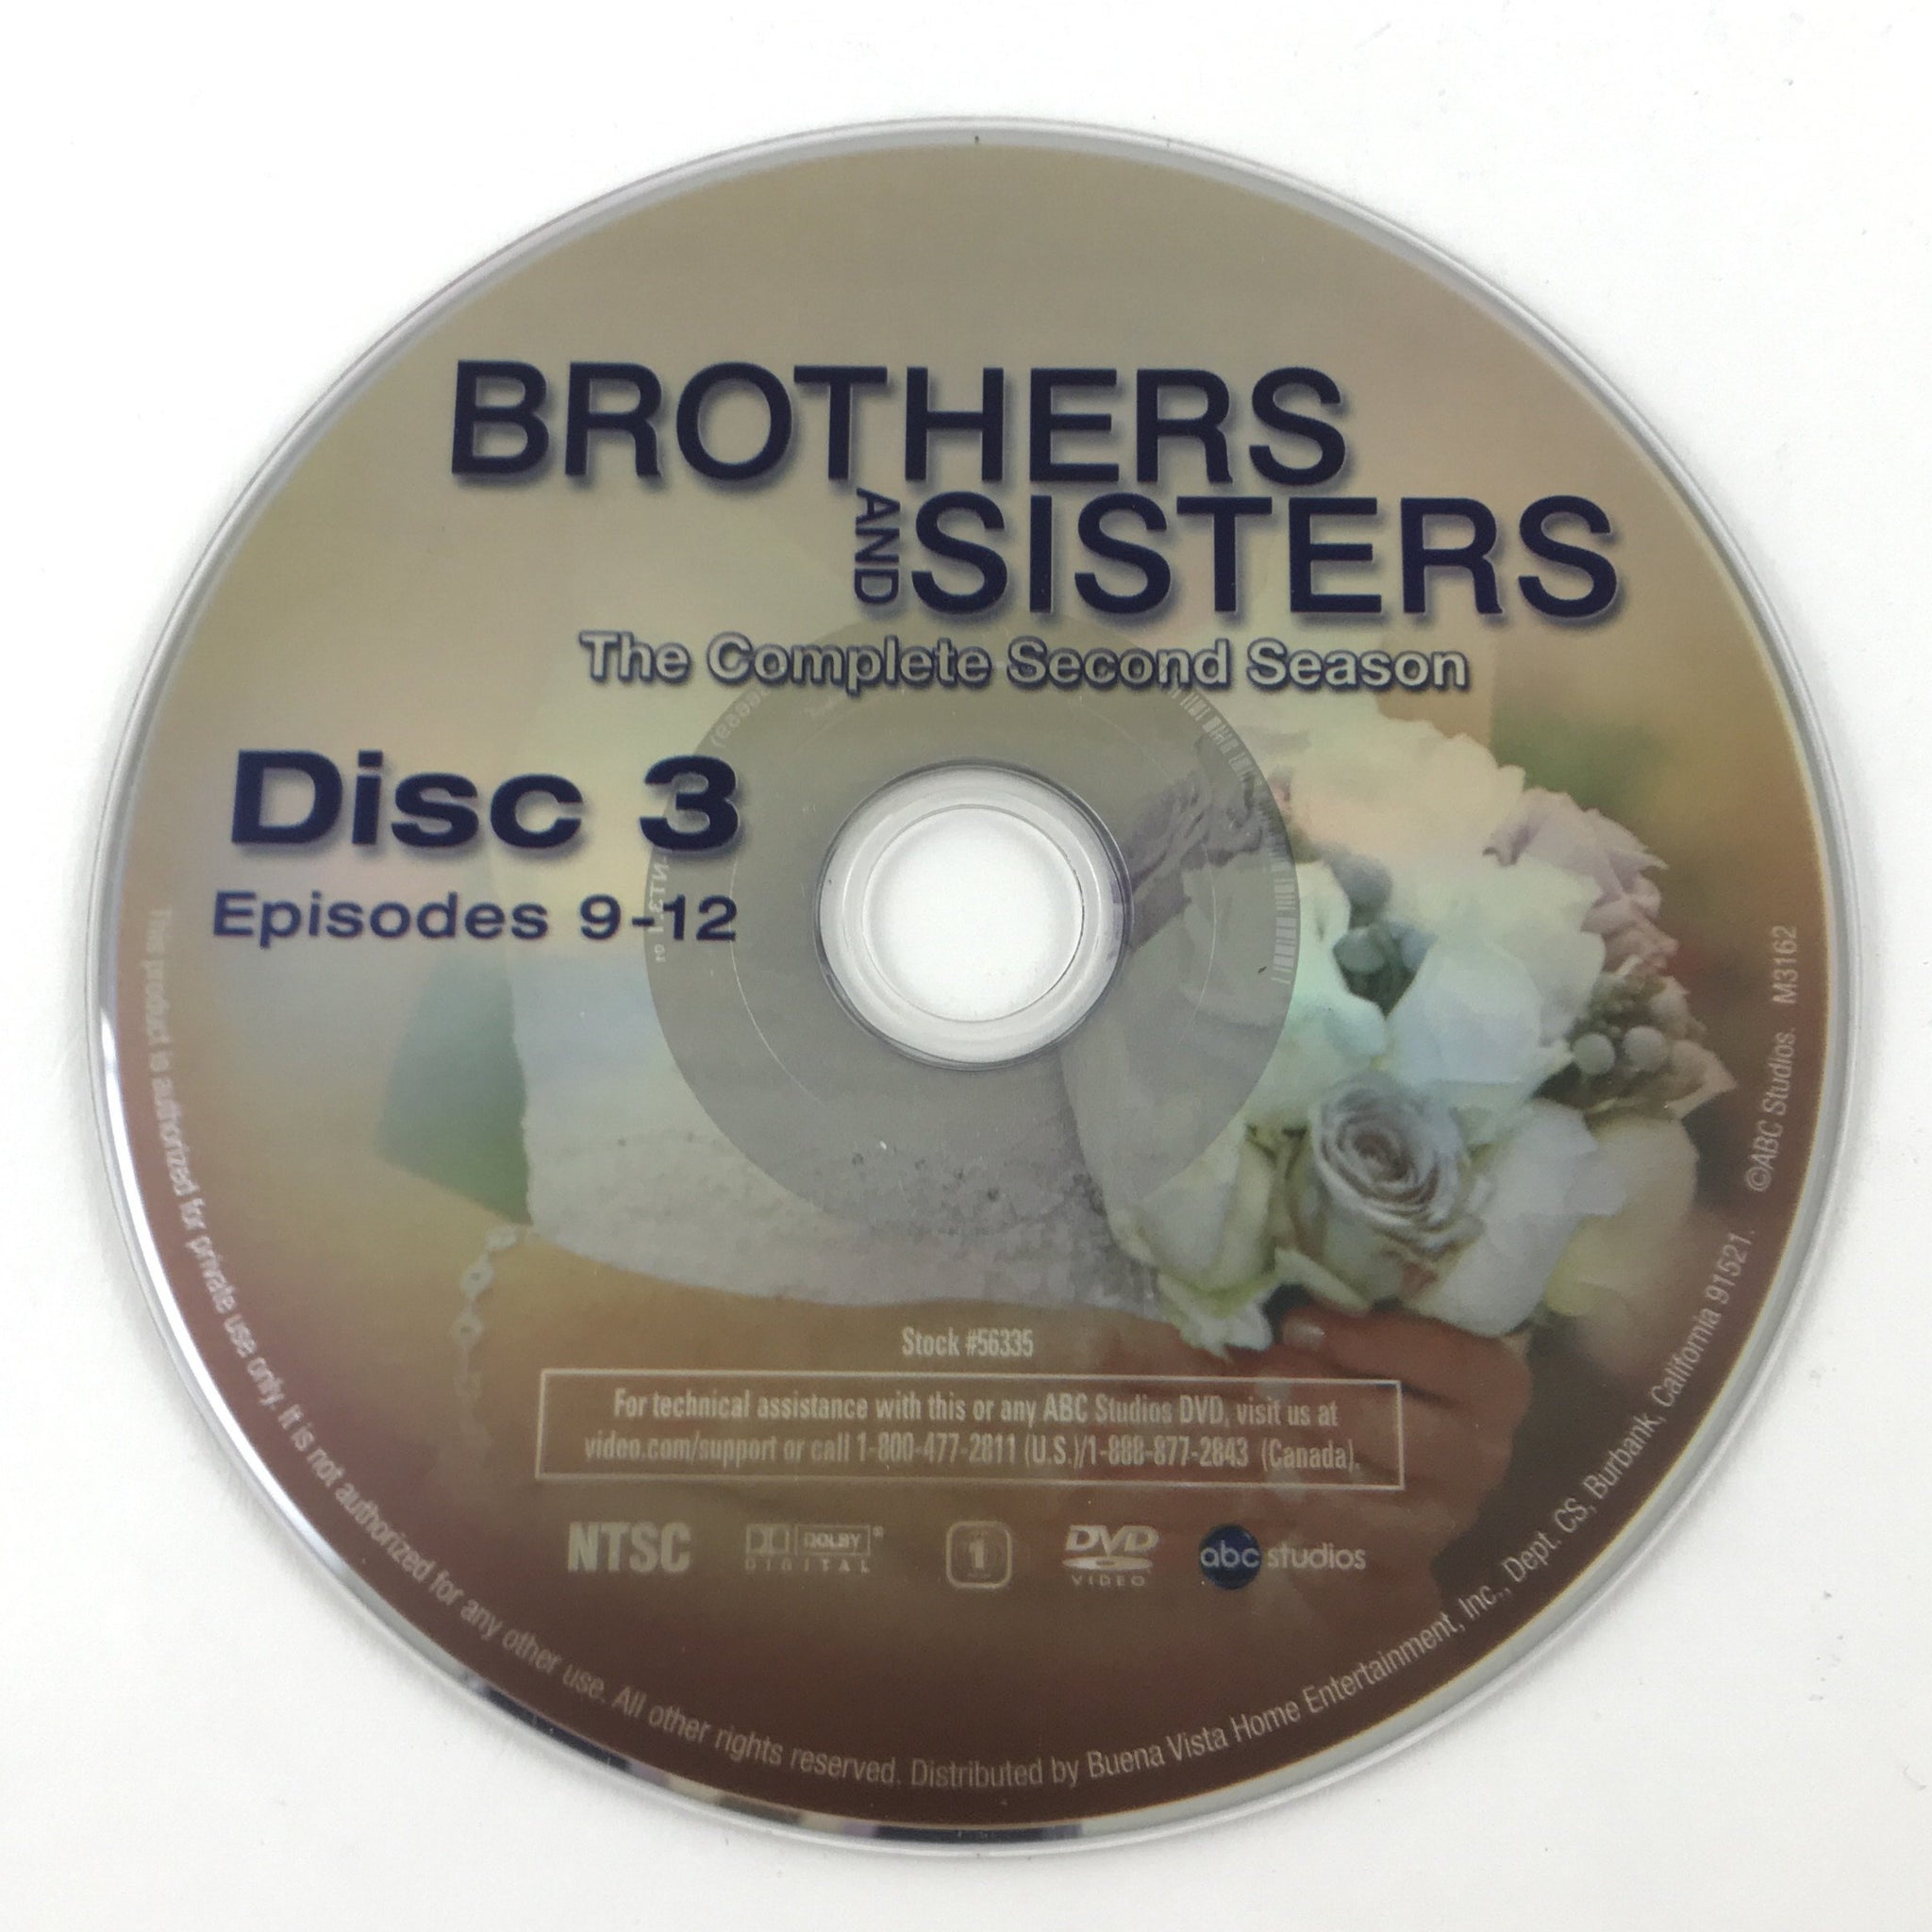 Brothers  And Sisters Season 2 - Episodes 9-12 (DVD) Sally Fields - DISC 3 ONLY